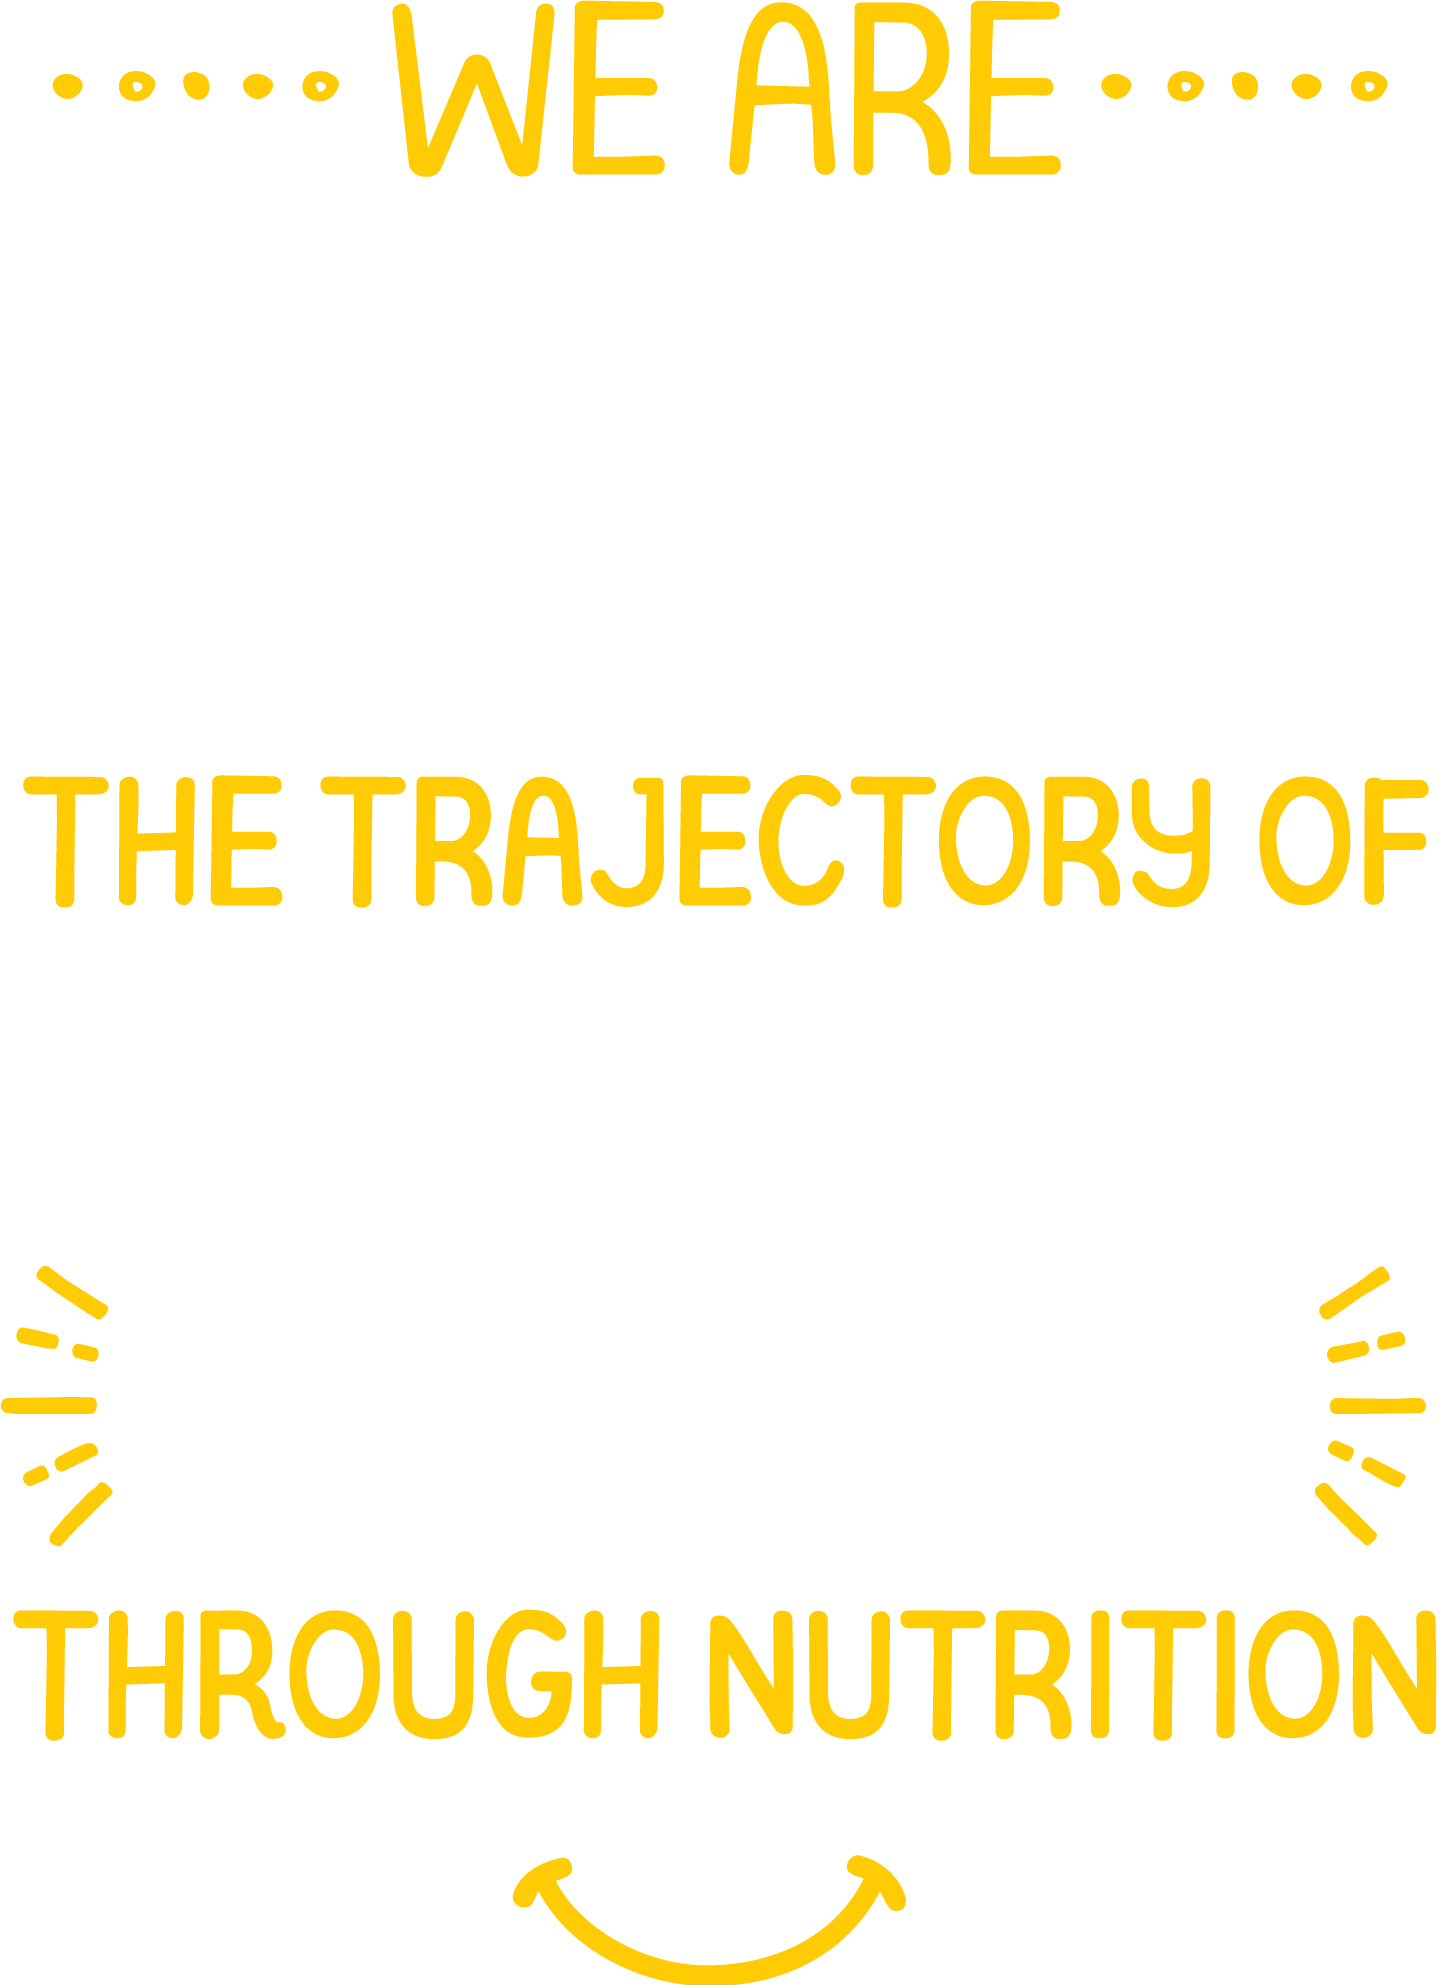 We Are On A Mission To Change The Trajectory of Children's Health Through Nutrition